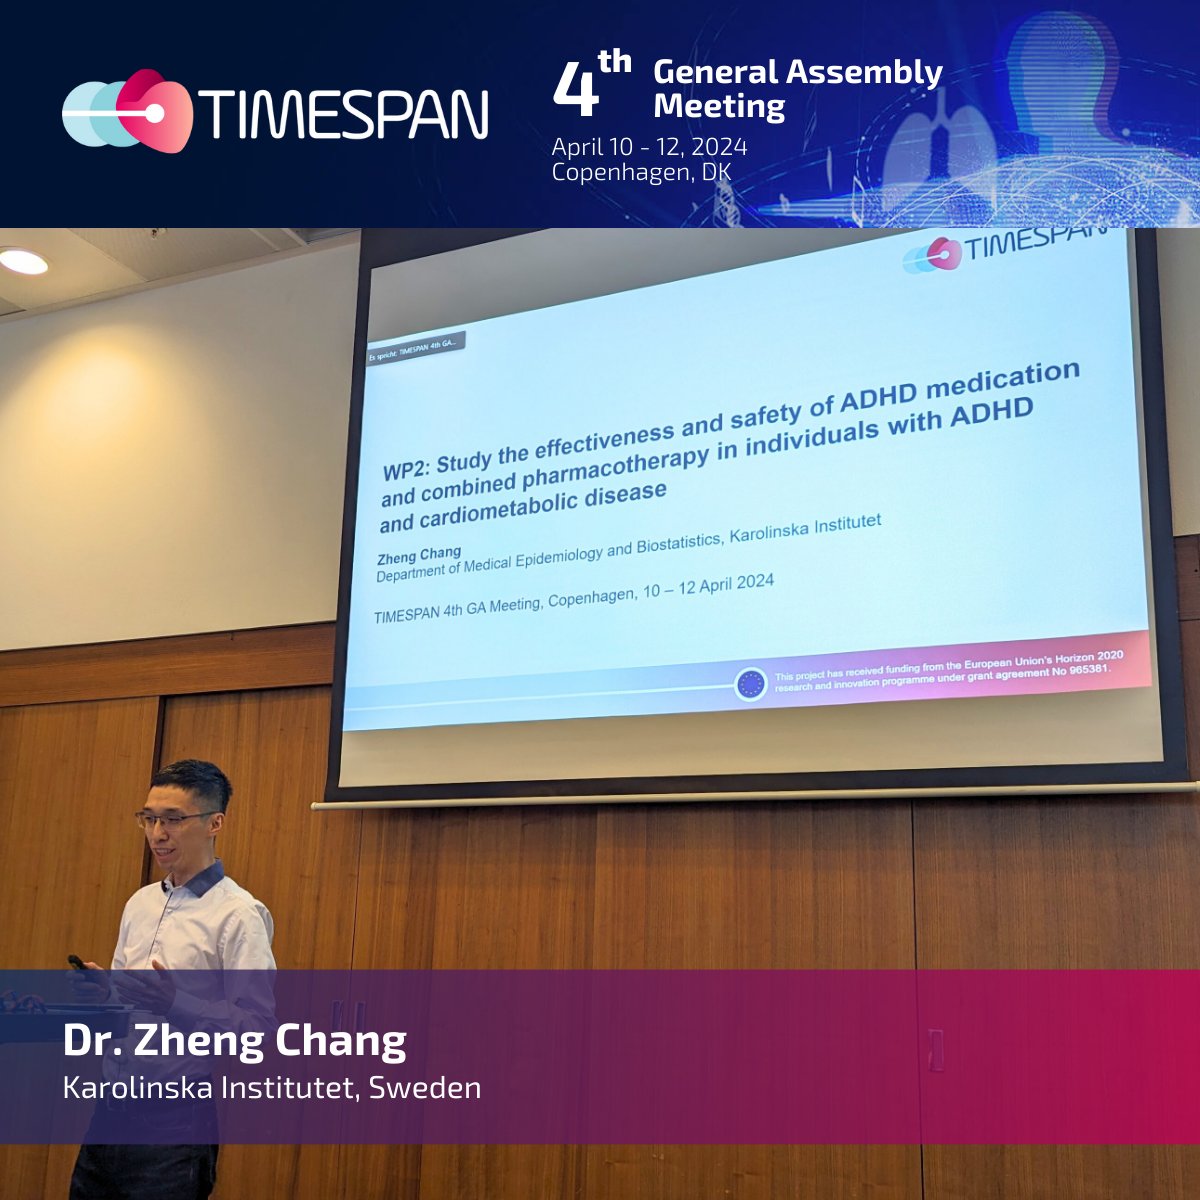 Next on our agenda, we'll be listening to #ZhengChang, whose work package aims to answer the question: Is ADHD medication in combination with medication for cardiometabolic diseases, like #obesity, #type2diabetes, safe and effective? 🧠💊 #TIMESPAN